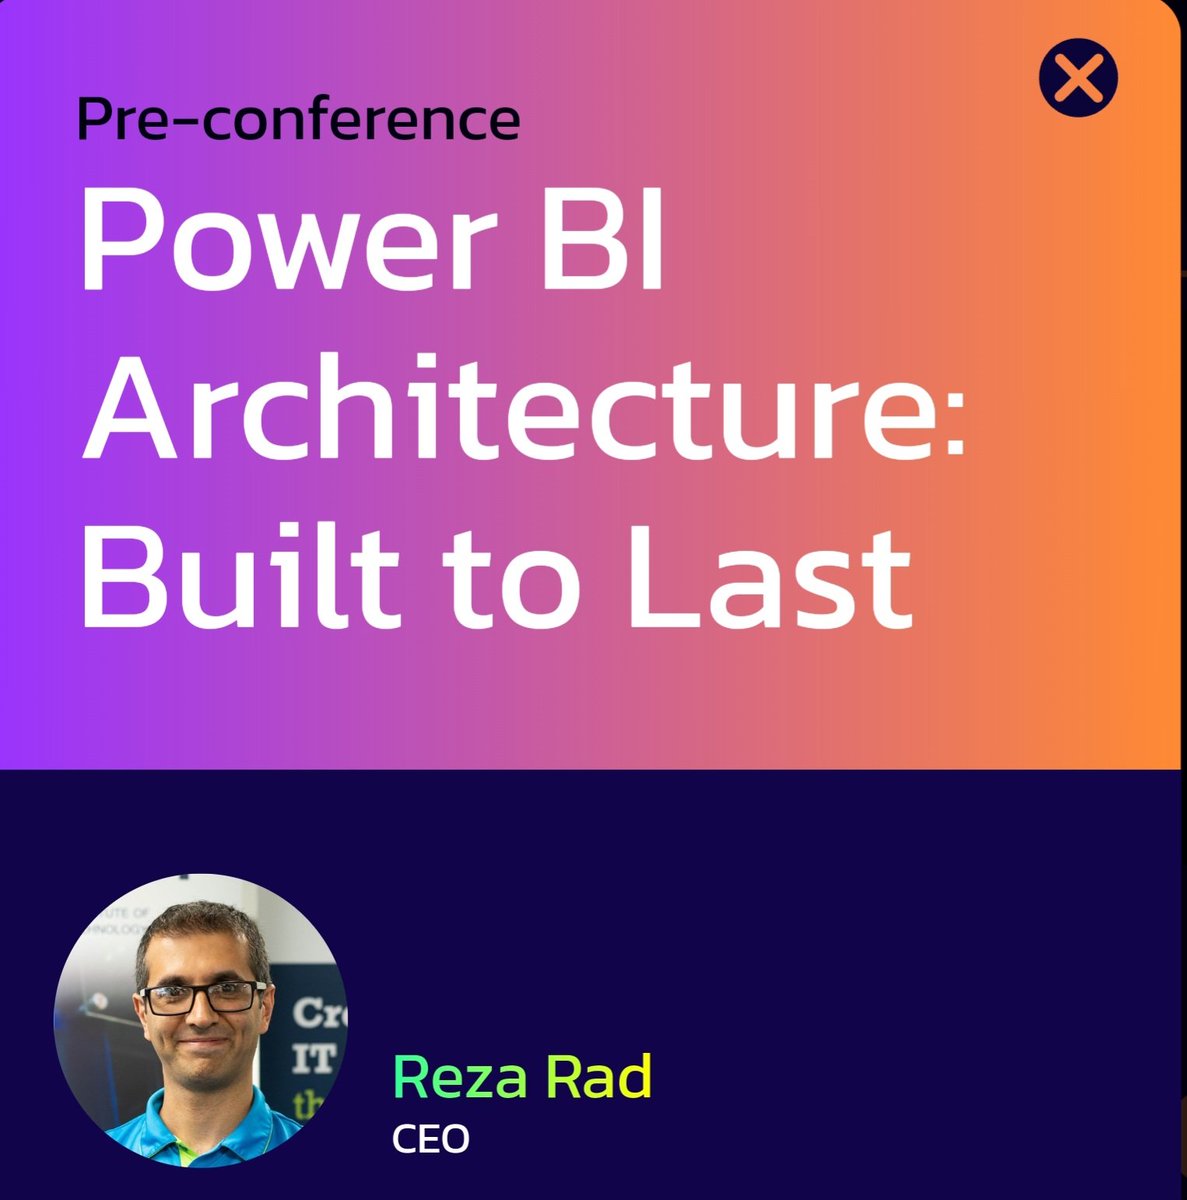 #PassSummit @PASSDataSummit pre conferences are announced 
and I will be doing a full day pre-conference on #PowerBI #architecture in November in Seattle 
can't wait to see you all there 
passdatacommunitysummit.com/sessions/?day=…